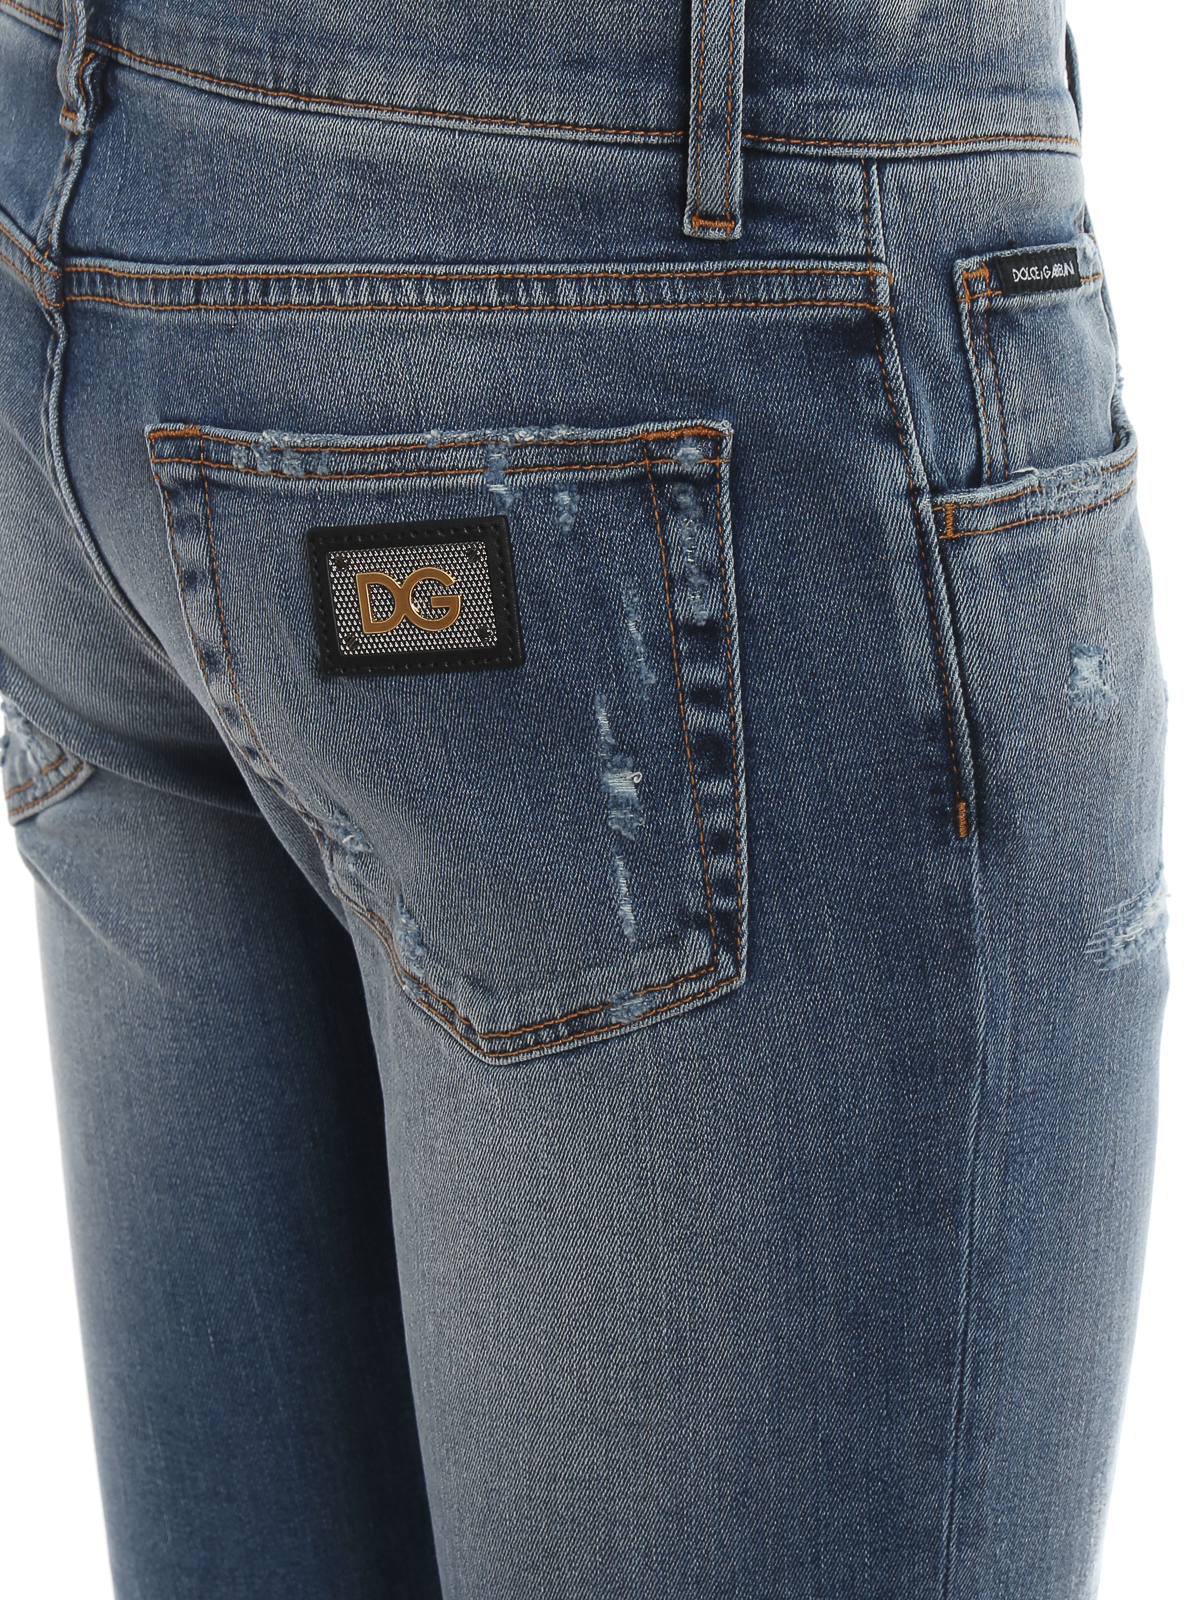 dolce and gabbana distressed jeans